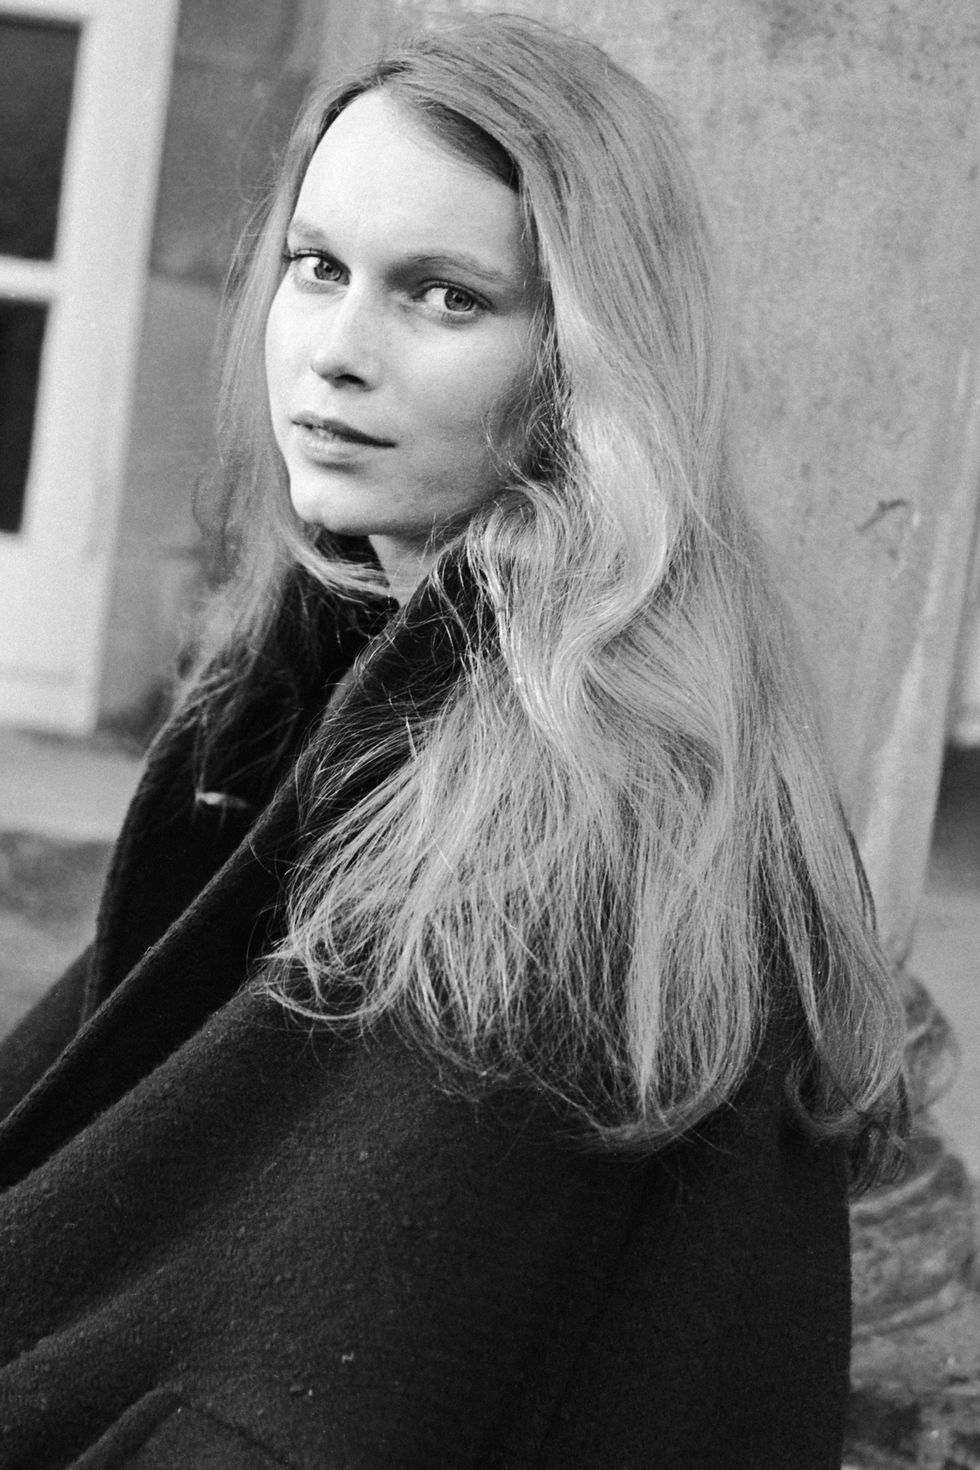 A Look Back At All Of Mia Farrow's Iconic Moments